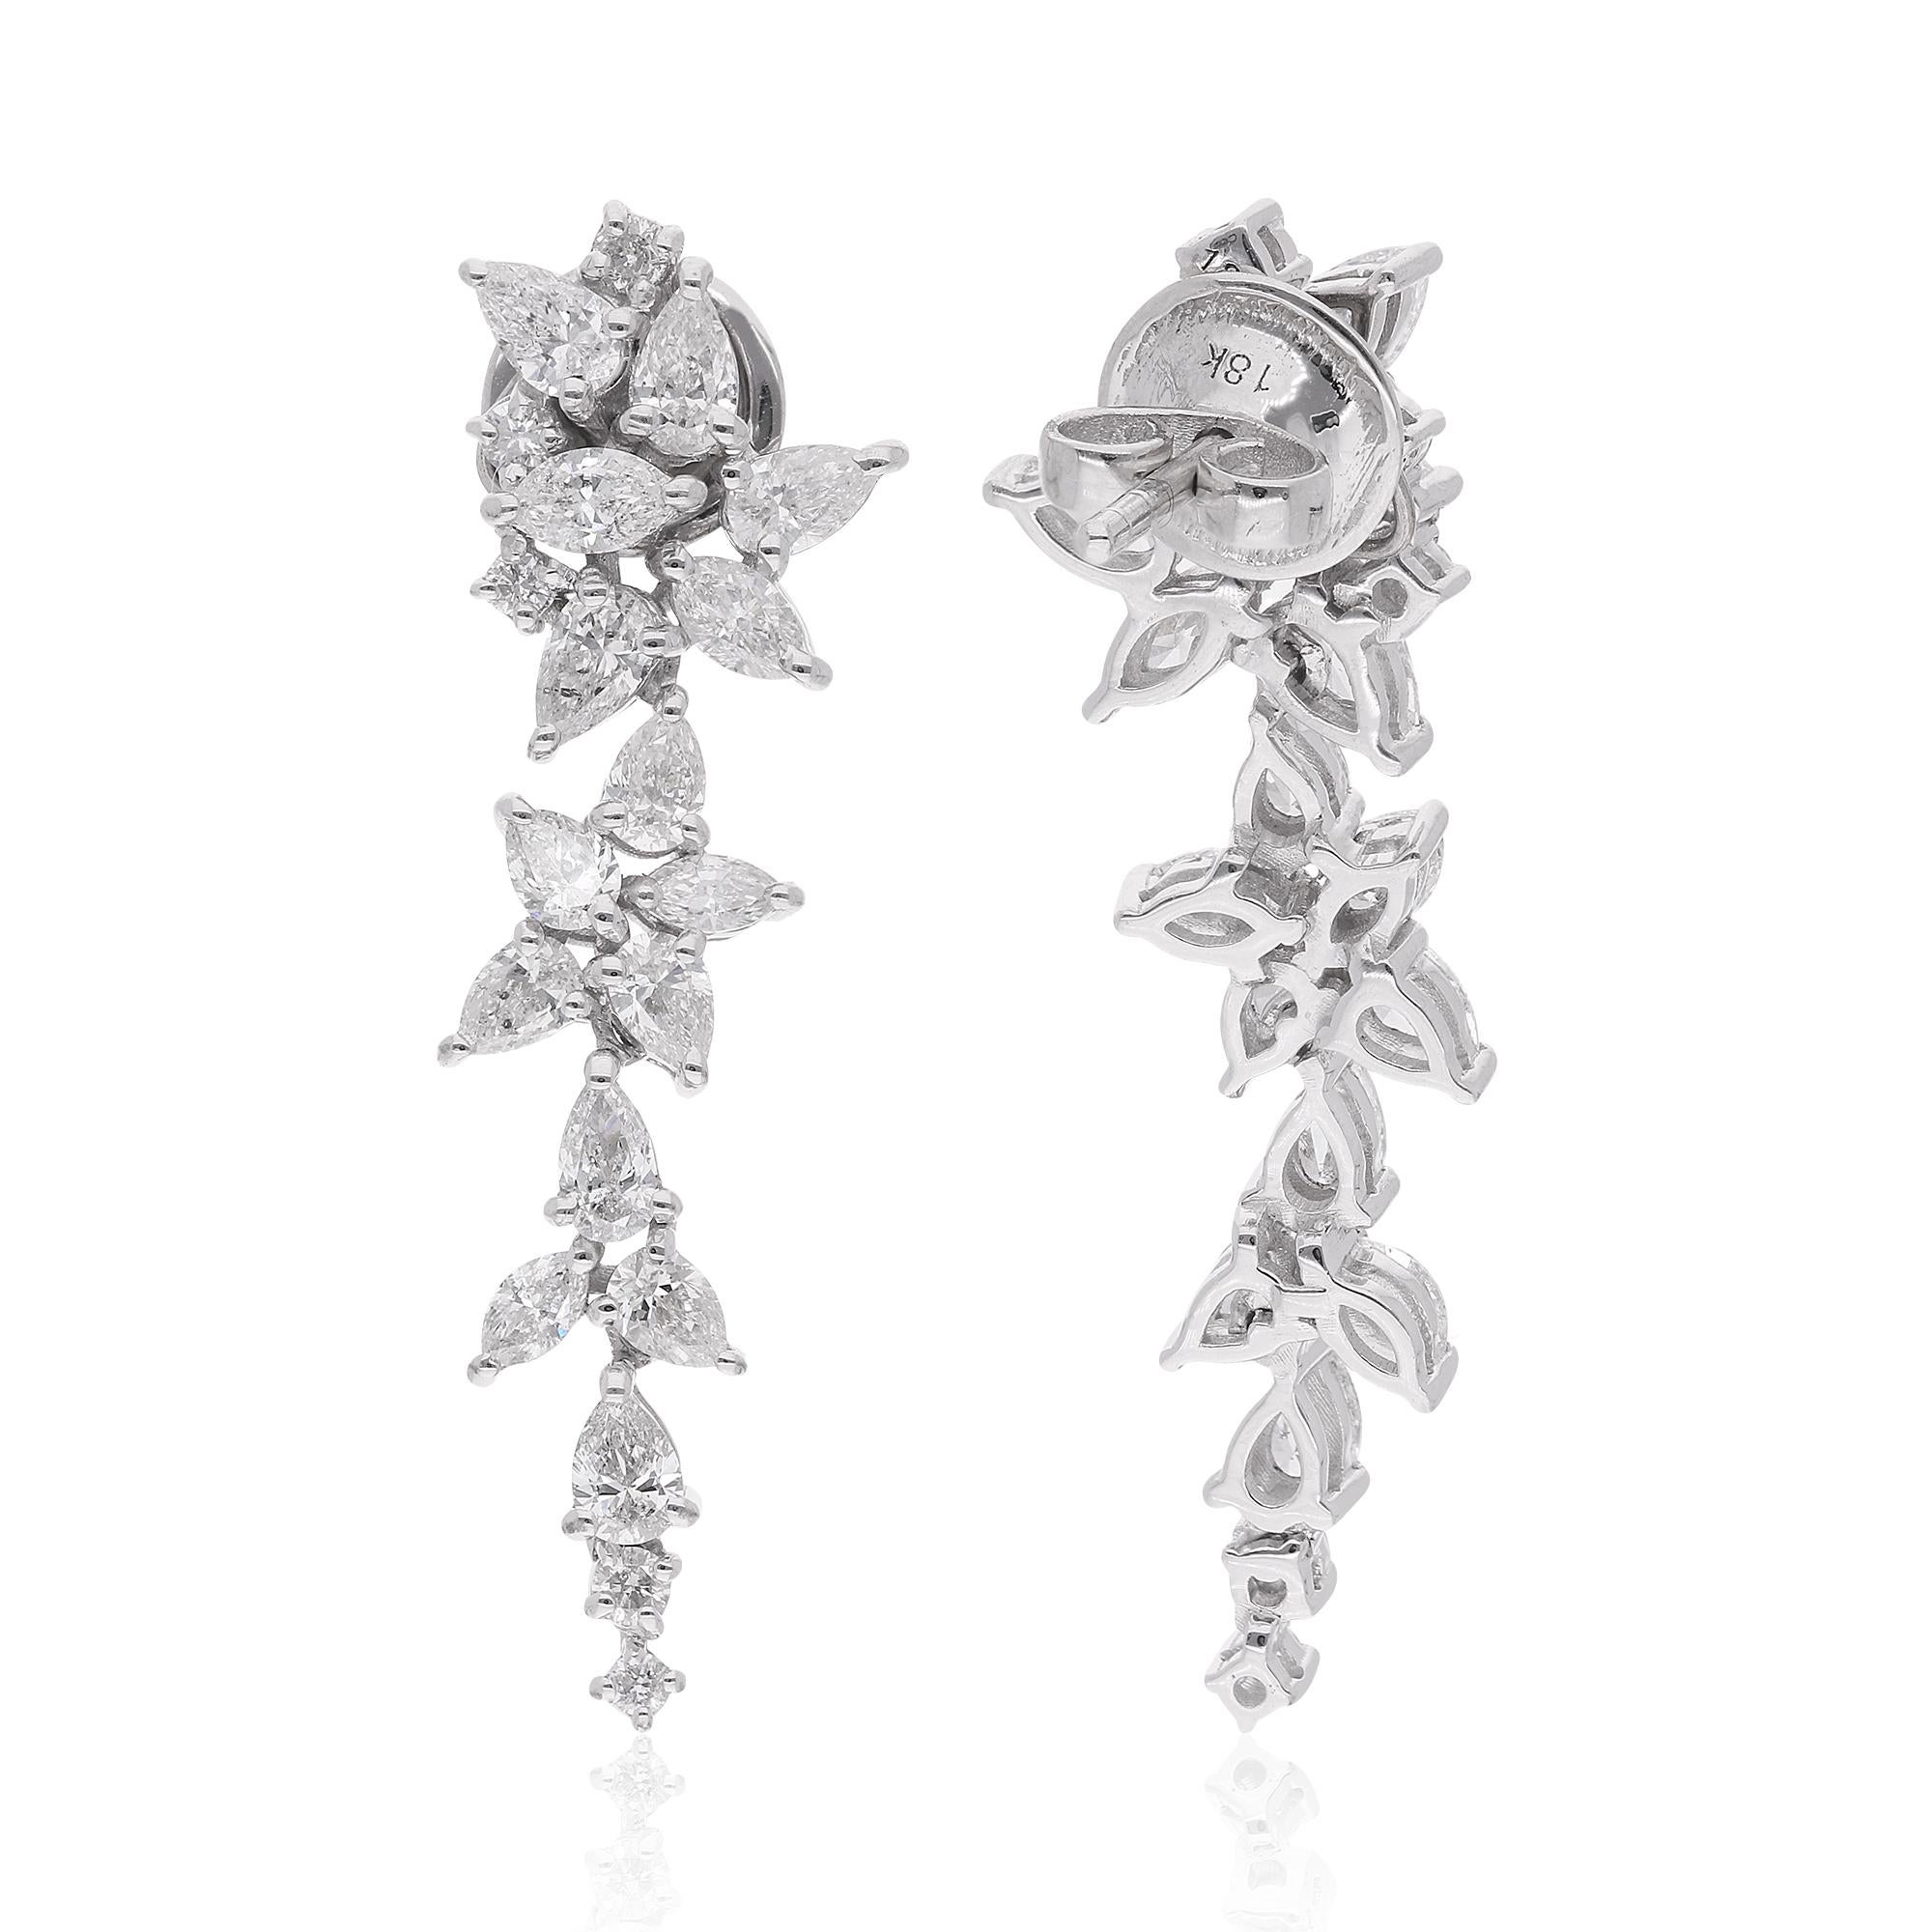 Surrounding the round diamonds are graceful pear-shaped diamonds, prized for their elegant silhouette and captivating allure. The pear diamonds add a touch of romance and sophistication to the earrings, complementing the brilliance of the round